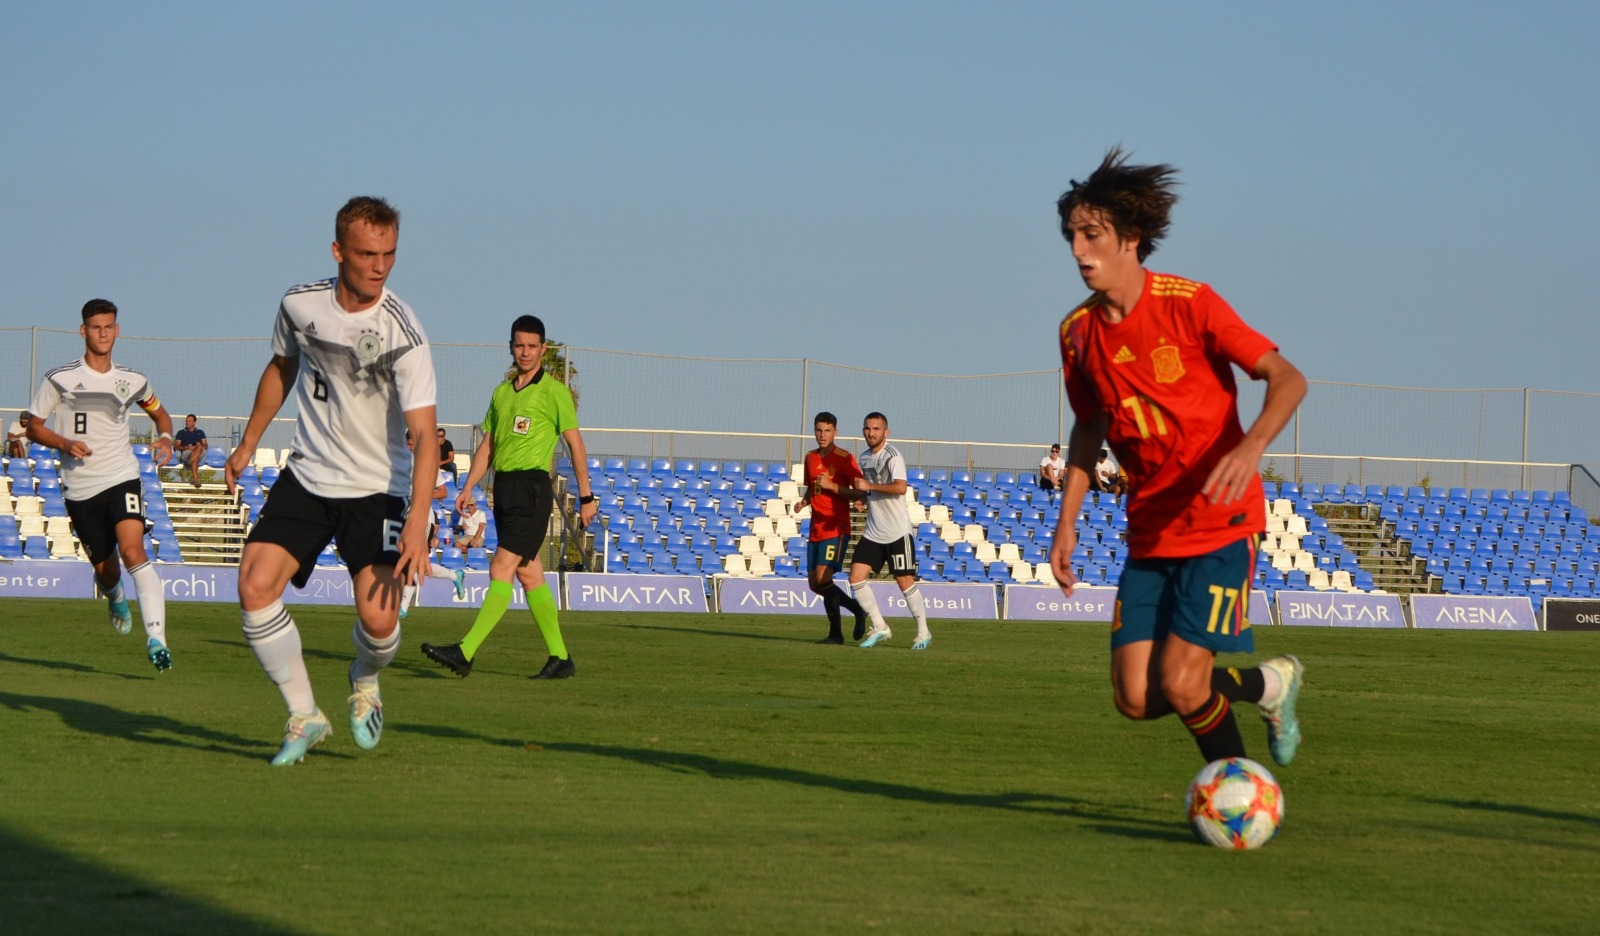 Bryan Gil in action for Spain U19 